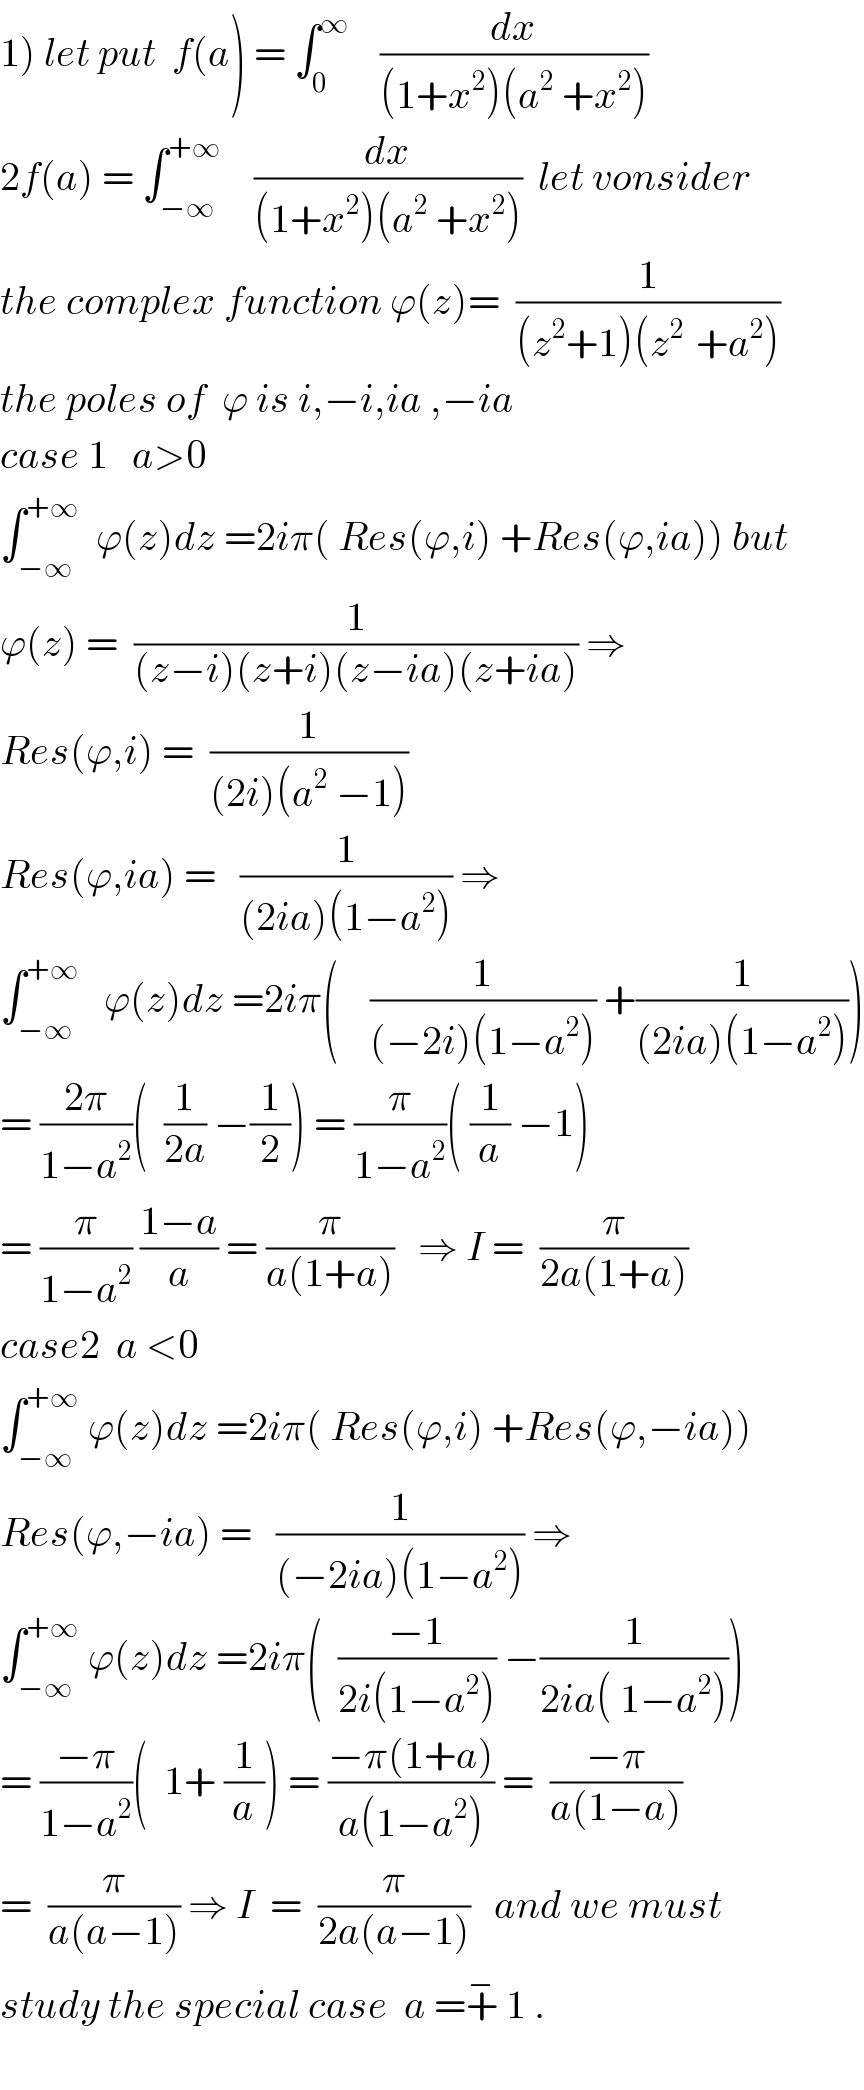 1) let put  f(a) = ∫_0 ^∞     (dx/((1+x^2 )(a^2  +x^2 )))  2f(a) = ∫_(−∞) ^(+∞)     (dx/((1+x^2 )(a^2  +x^2 )))  let vonsider  the complex function ϕ(z)=  (1/((z^2 +1)(z^(2 )  +a^2 )))  the poles of  ϕ is i,−i,ia ,−ia  case 1   a>0   ∫_(−∞) ^(+∞)   ϕ(z)dz =2iπ( Res(ϕ,i) +Res(ϕ,ia)) but  ϕ(z) =  (1/((z−i)(z+i)(z−ia)(z+ia))) ⇒  Res(ϕ,i) =  (1/((2i)(a^2  −1)))  Res(ϕ,ia) =   (1/((2ia)(1−a^2 ))) ⇒  ∫_(−∞) ^(+∞)    ϕ(z)dz =2iπ(    (1/((−2i)(1−a^2 ))) +(1/((2ia)(1−a^2 ))))  = ((2π)/(1−a^2 ))(  (1/(2a)) −(1/2)) = (π/(1−a^2 ))( (1/a) −1)  = (π/(1−a^2 )) ((1−a)/a) = (π/(a(1+a)))   ⇒ I =  (π/(2a(1+a)))  case2  a <0   ∫_(−∞) ^(+∞)  ϕ(z)dz =2iπ( Res(ϕ,i) +Res(ϕ,−ia))  Res(ϕ,−ia) =   (1/((−2ia)(1−a^2 ))) ⇒  ∫_(−∞) ^(+∞)  ϕ(z)dz =2iπ(  ((−1)/(2i(1−a^2 ))) −(1/(2ia( 1−a^2 ))))  = ((−π)/(1−a^2 ))(  1+ (1/a)) = ((−π(1+a))/(a(1−a^2 ))) =  ((−π)/(a(1−a)))  =  (π/(a(a−1))) ⇒ I  =  (π/(2a(a−1)))   and we must  study the special case  a =+^−  1 .    